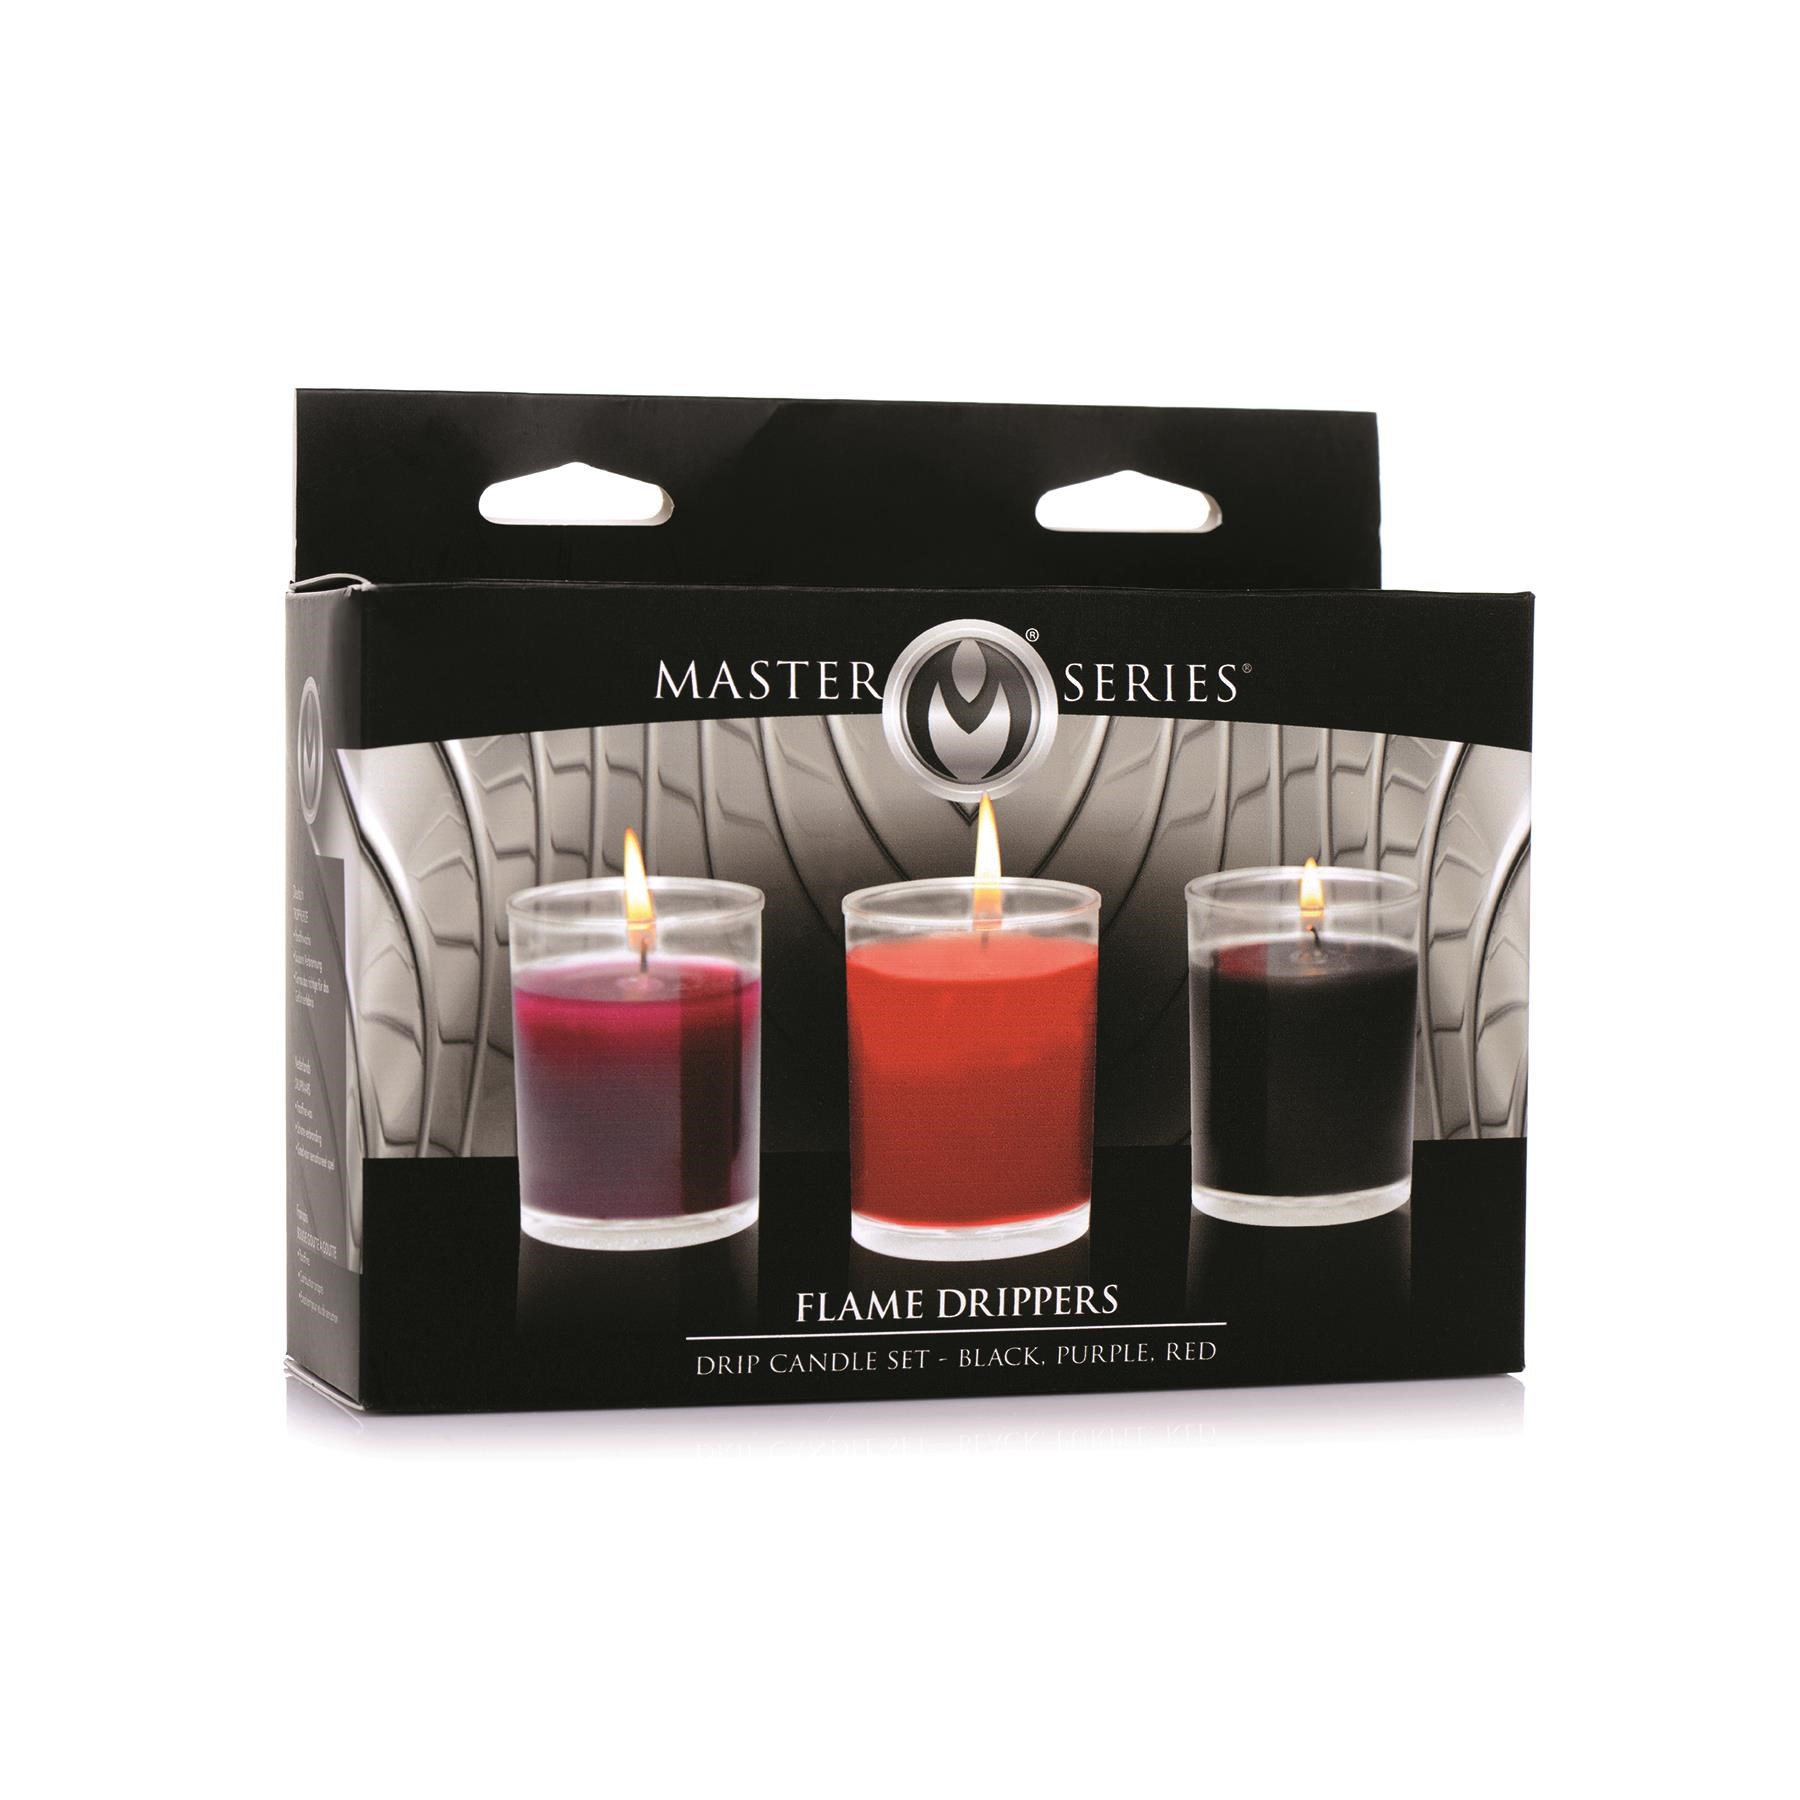 Master Series Flame Drippers Candle Set - Packaging Shot